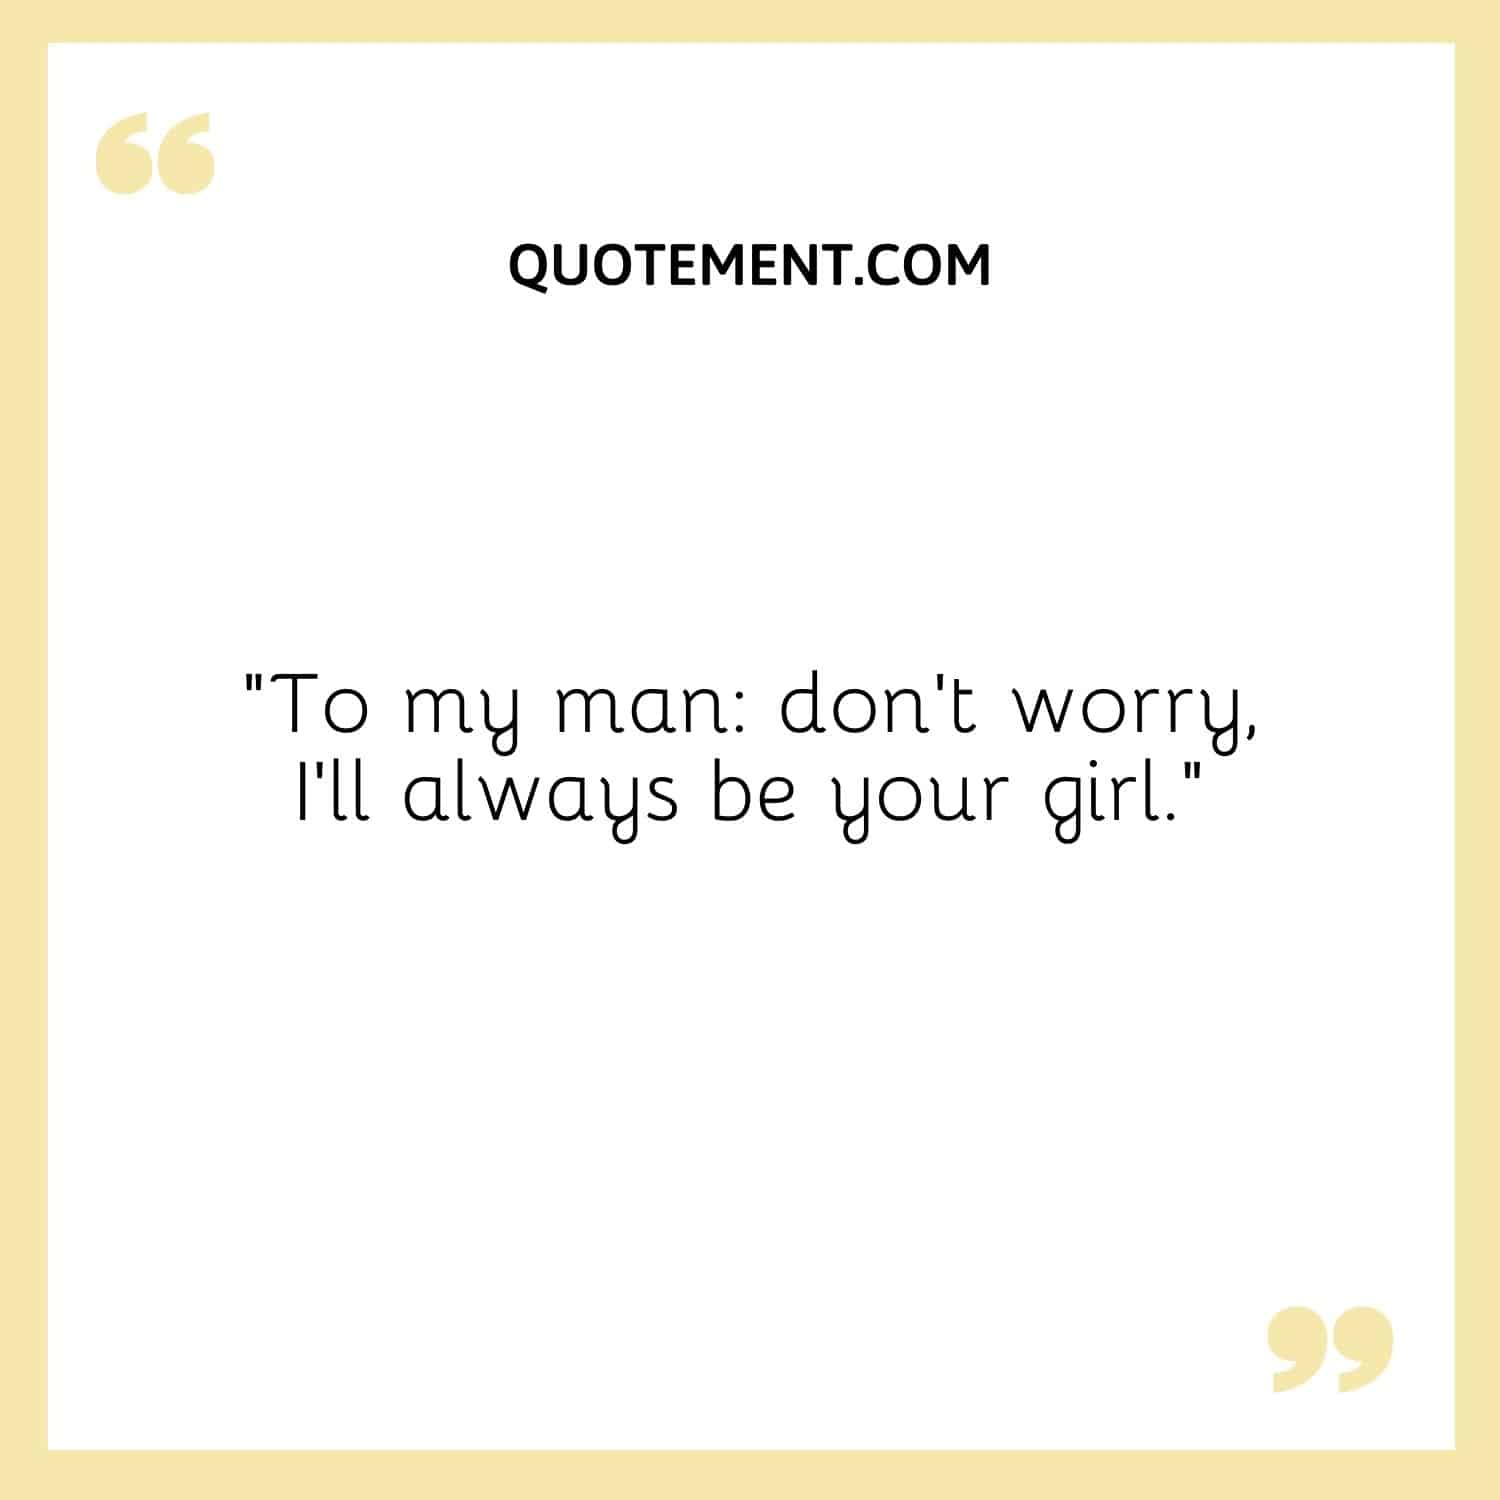 To my man, don't worry, I'll always be your girl.